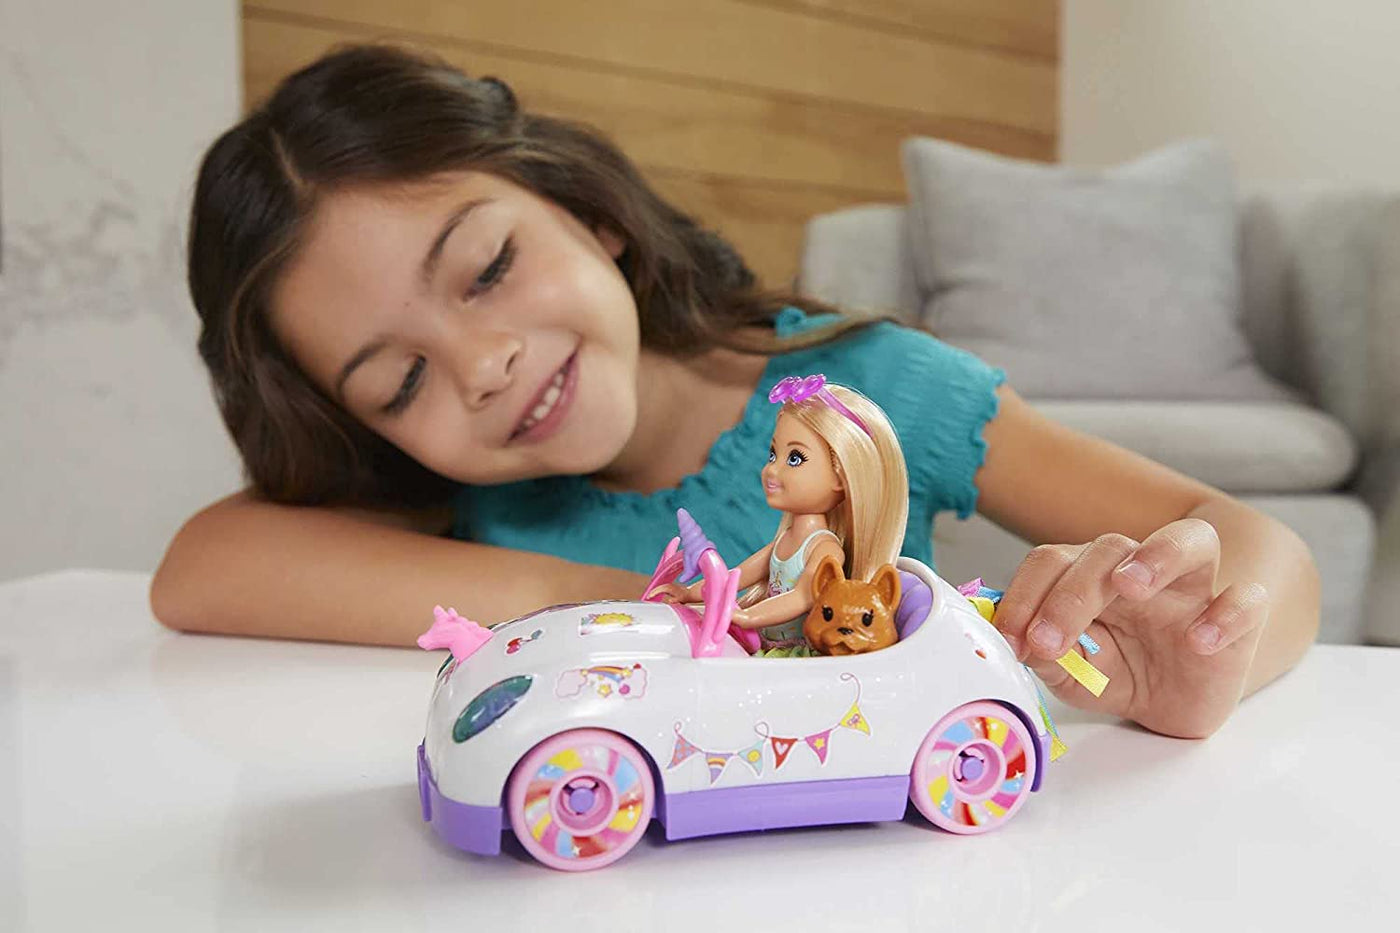 Club Chelsea Doll (6-Inch Blonde) With Open-Top Rainbow Unicorn-Themed Car & Pet Puppy | Barbie